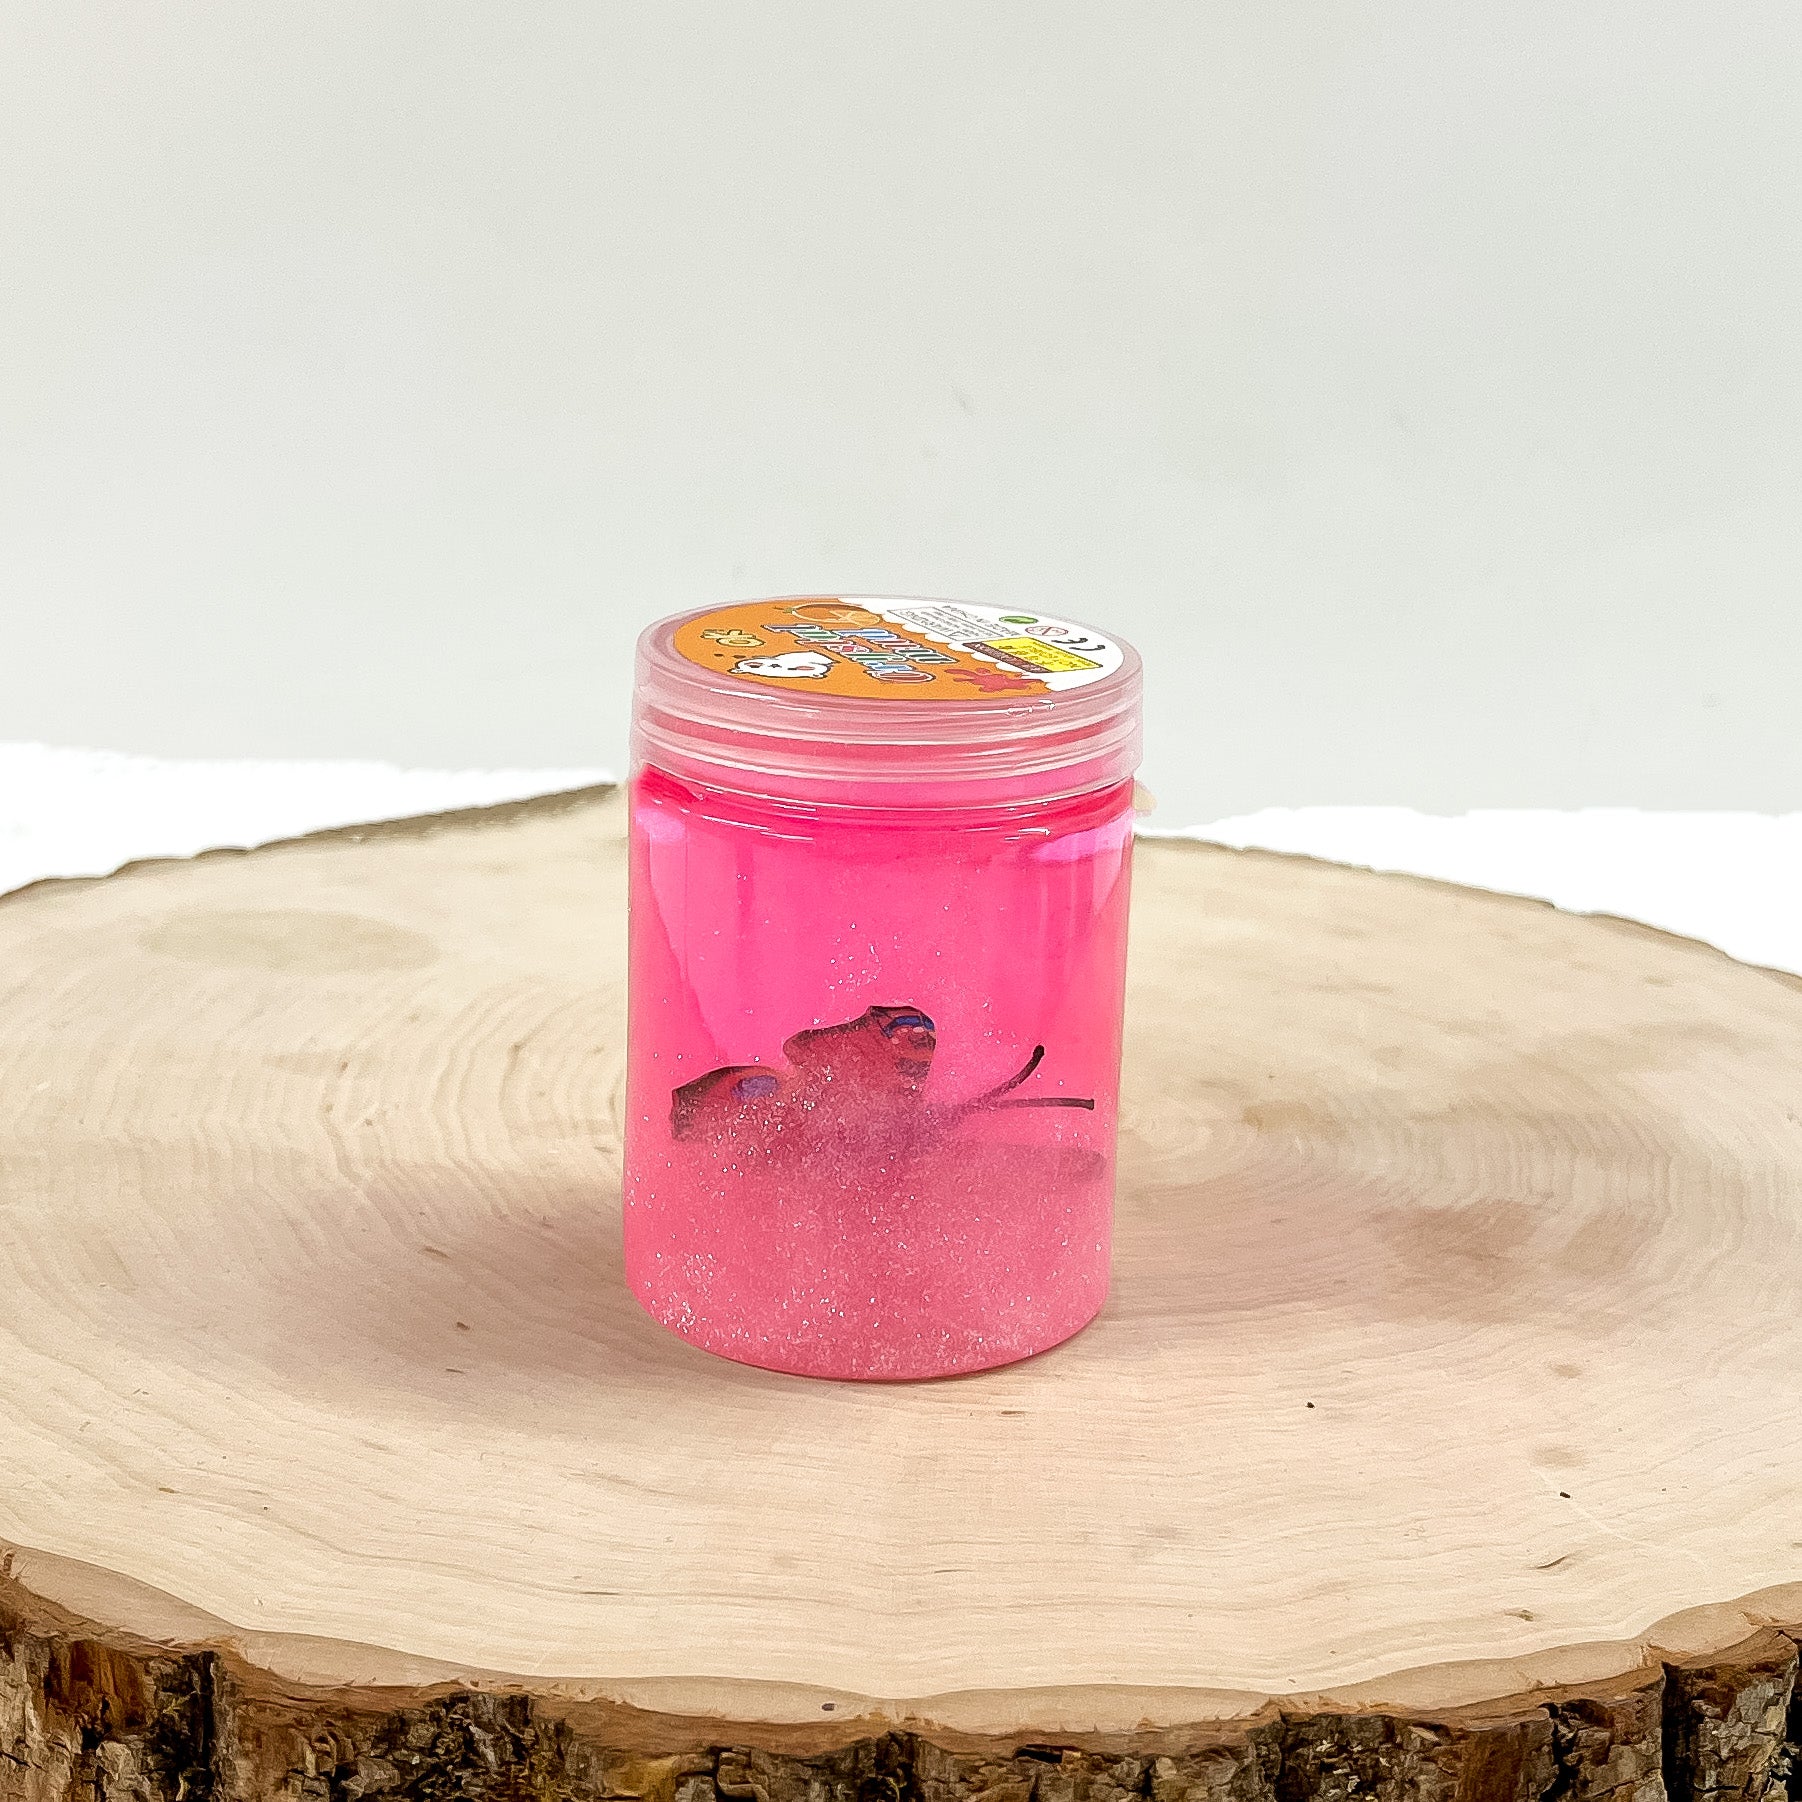 This is a clear slime with pink glitter and a butterfly, this container is taken on a slab of  wood and on a white background.